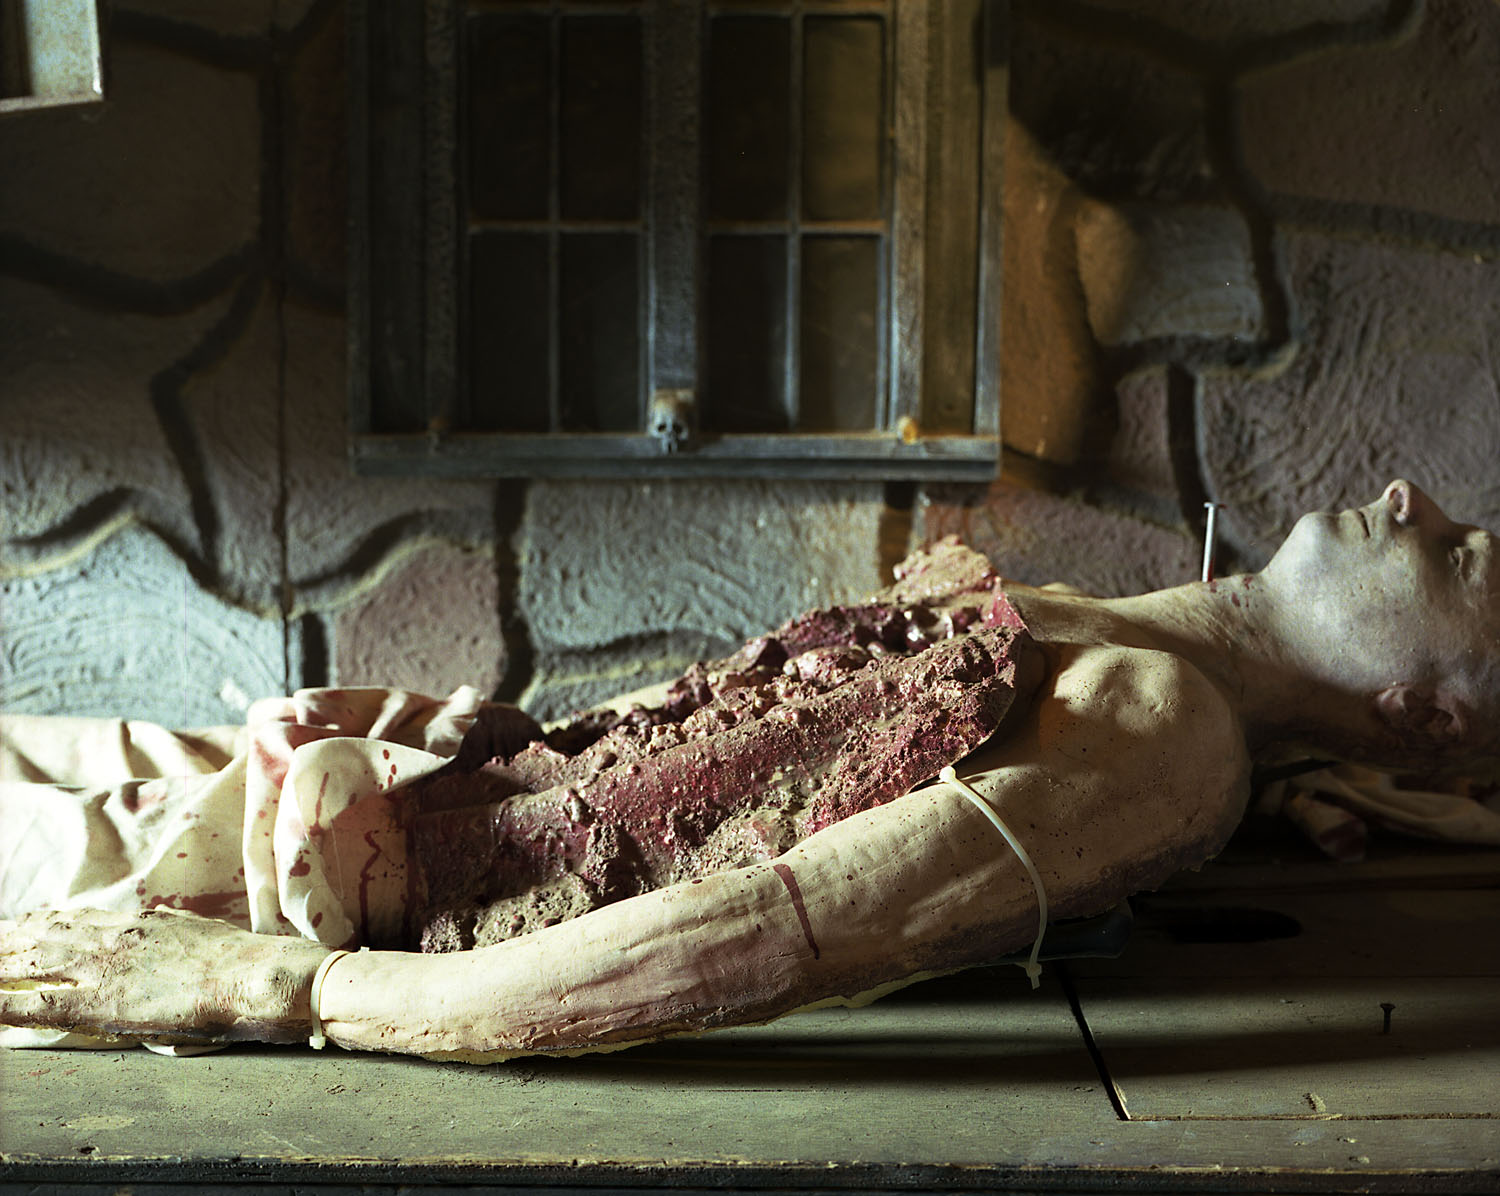 Image: Eviscerated body on table